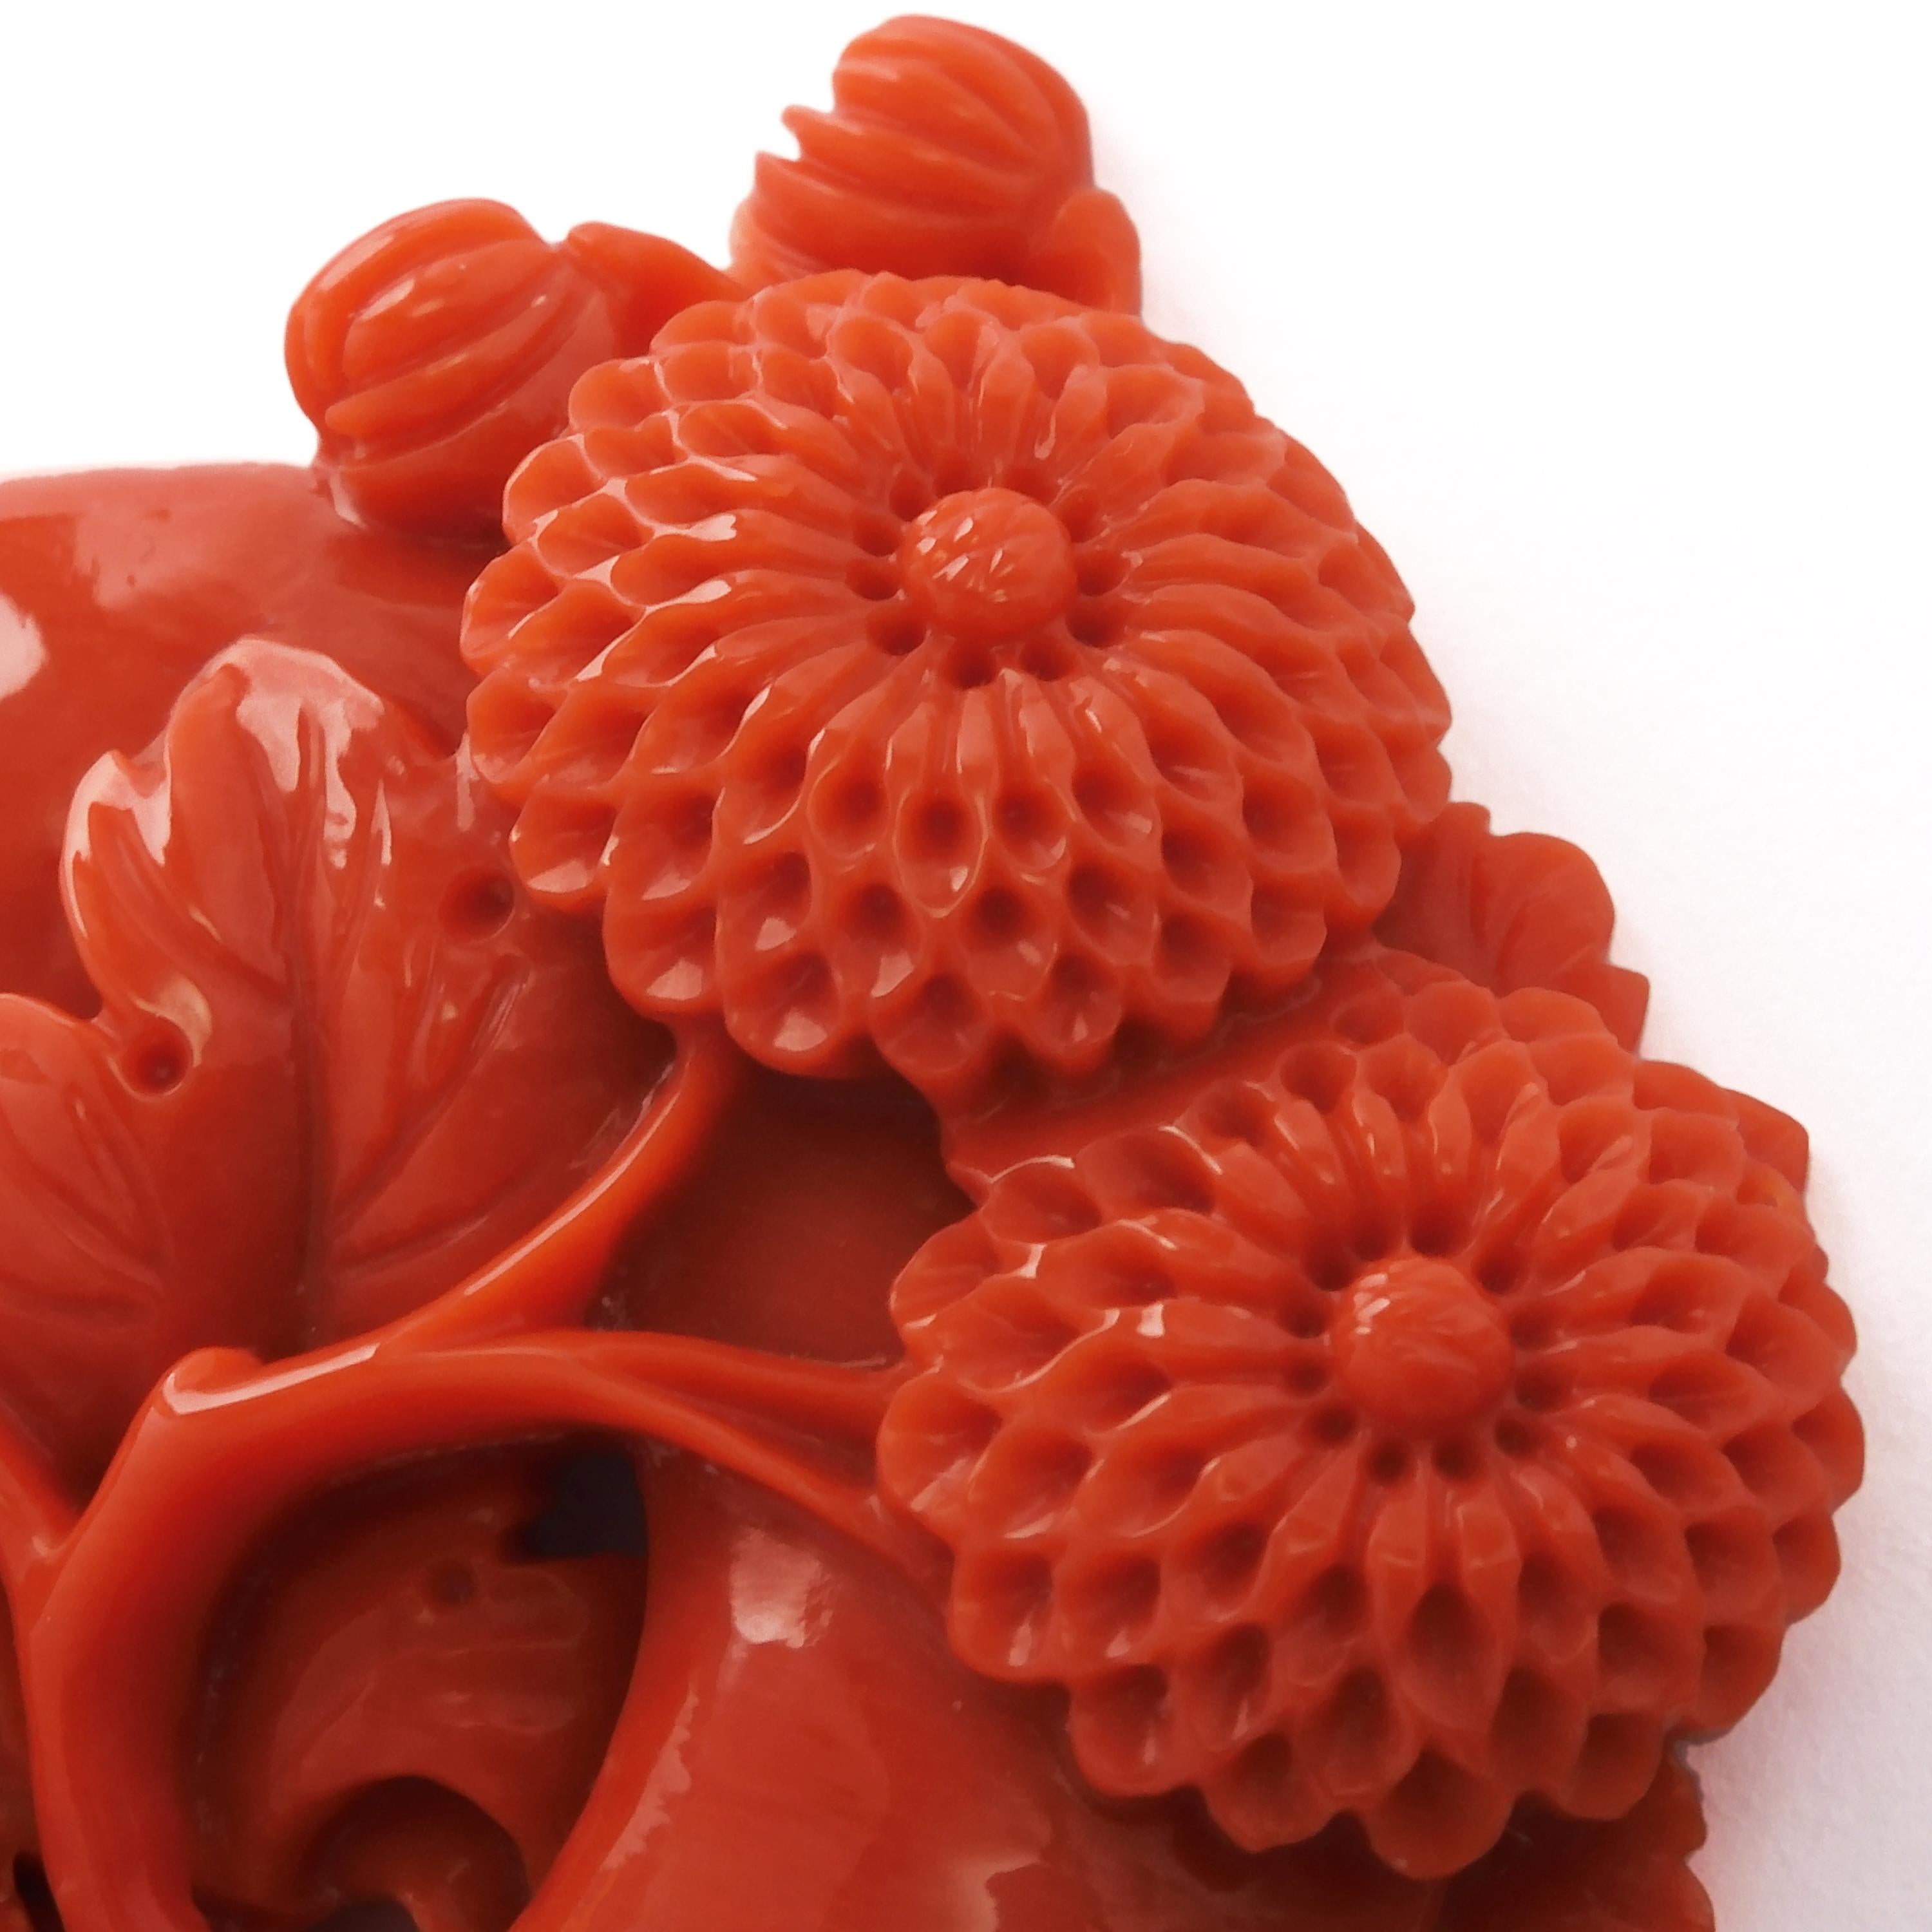 This vintage Japanese Momoiro Sango Coral carved plate features pretty pom pom mum. Chrysanthemum flower is a traditional pattern of Japanese art and crafts. This is made of high quality material with very little color unevenness. It is thick and